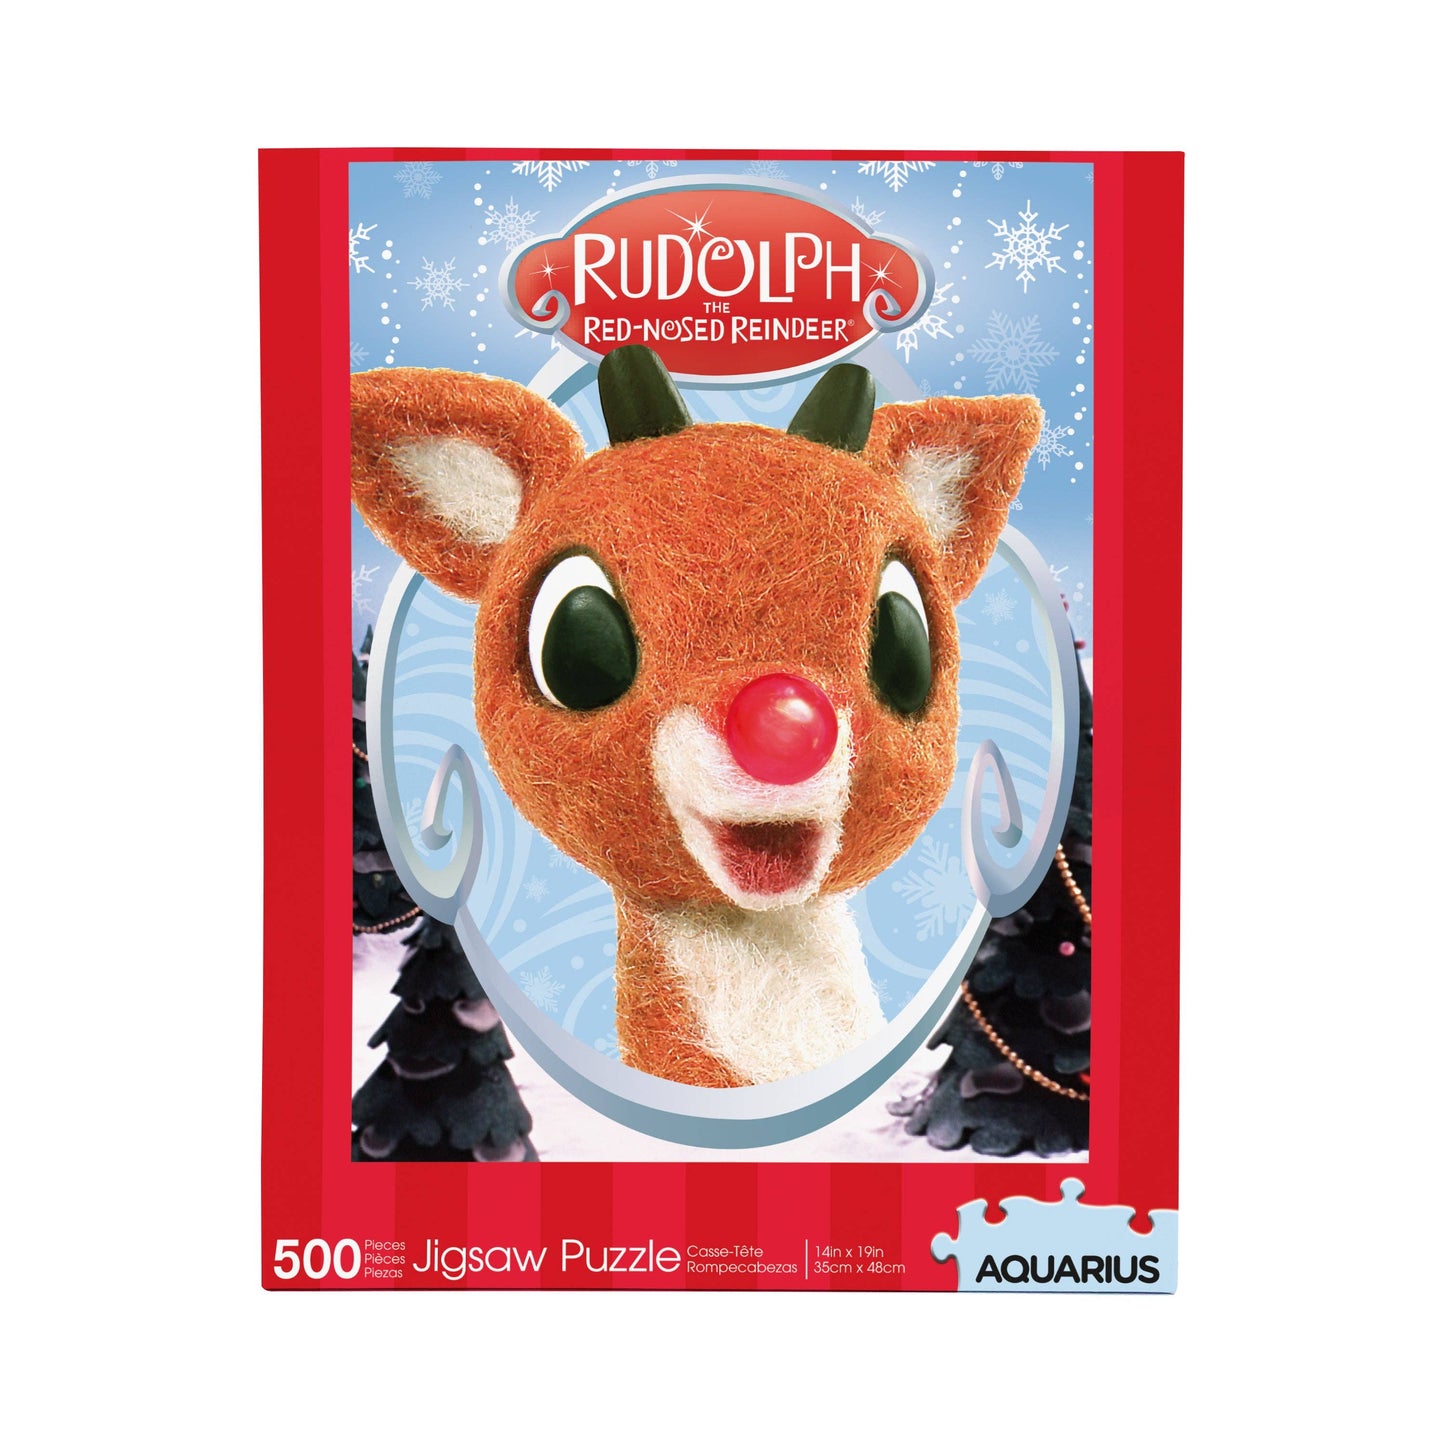 Rudolph Collage 500 Piece Jigsaw Puzzle